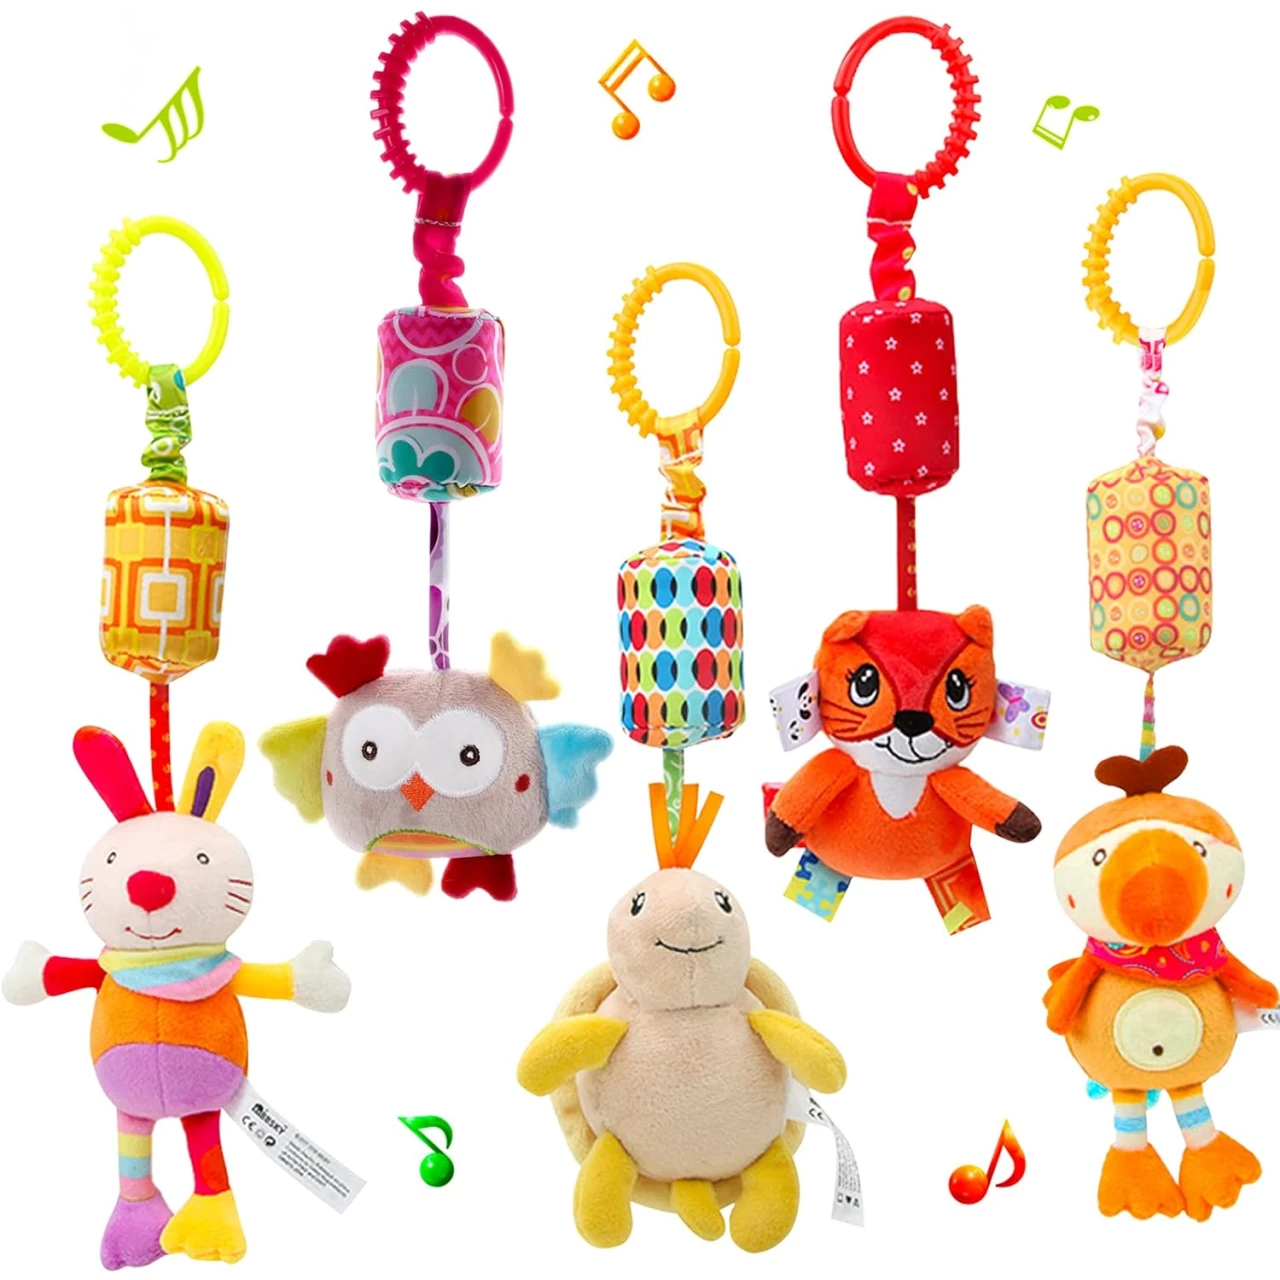 WILNARA Baby Hanging Toy Cartoon Animal Stuffed Rattle Bell Carseat Toys for 1-12 Months Baby Crib Stroller Pushchair (5 Pack)